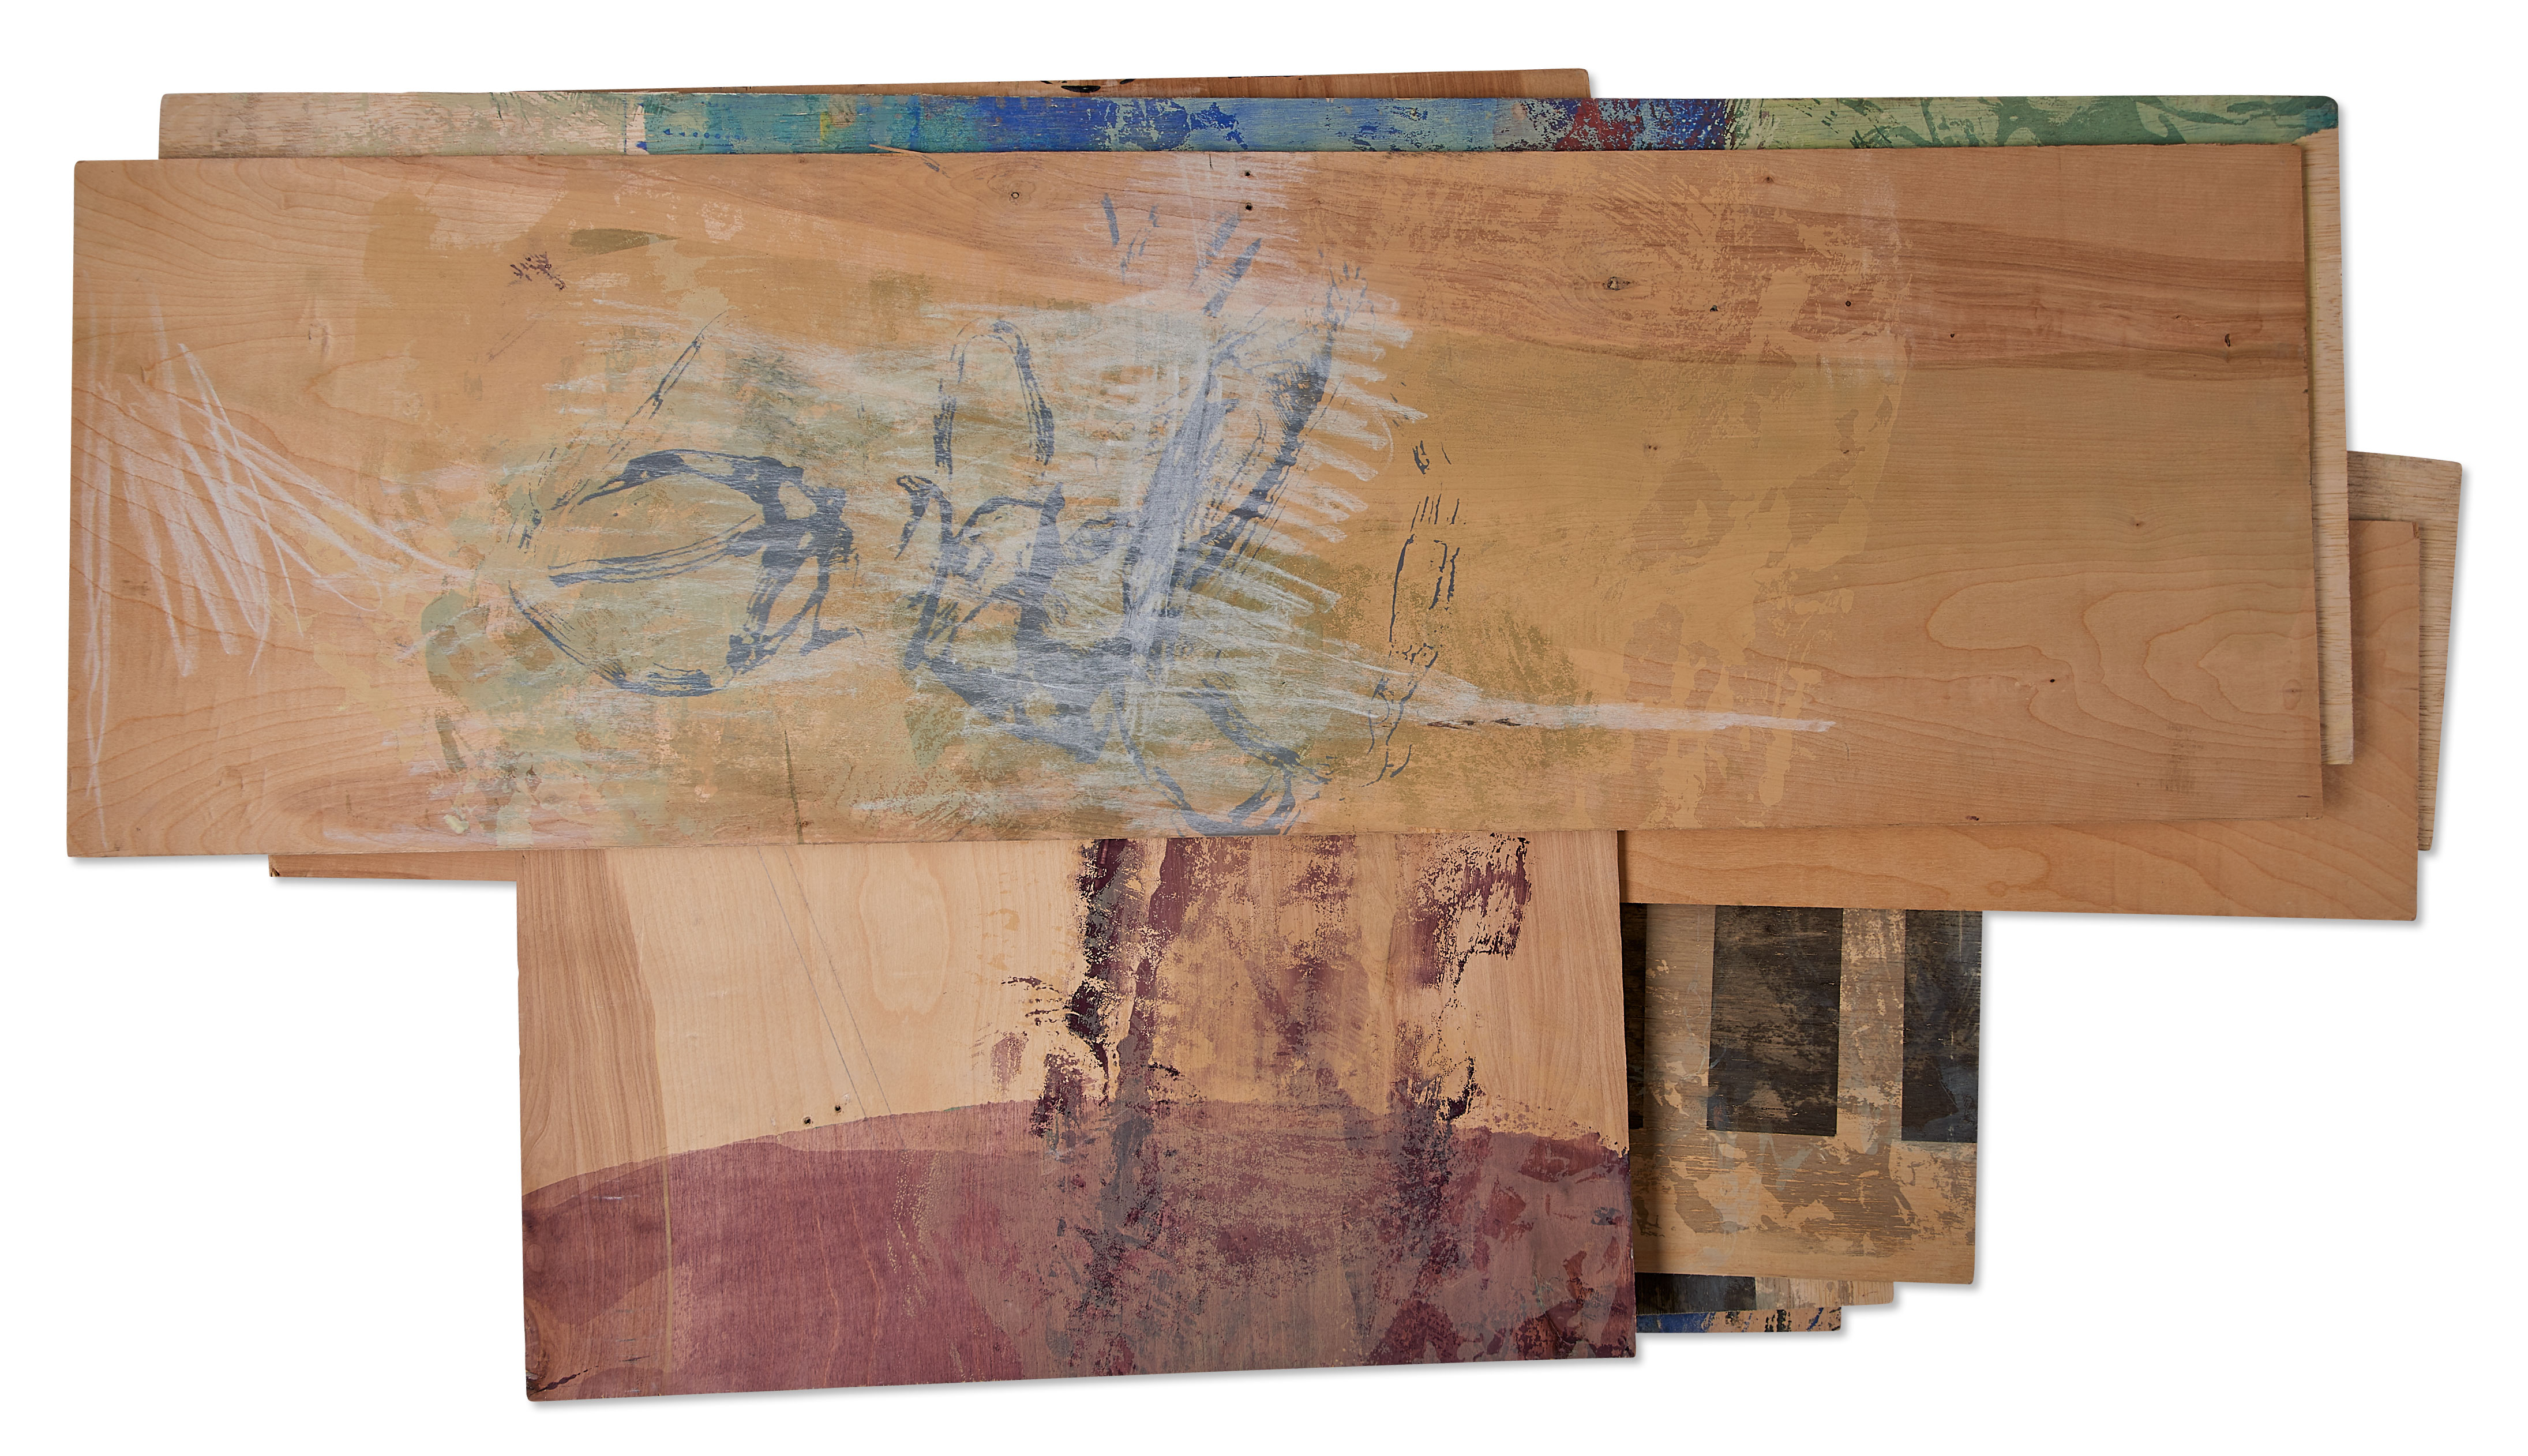 Photograph of stacked pieces of plywood with abstracted printed and drawn imagery in purple, blue, green, black, and white by the artist Caroline Coolidge.